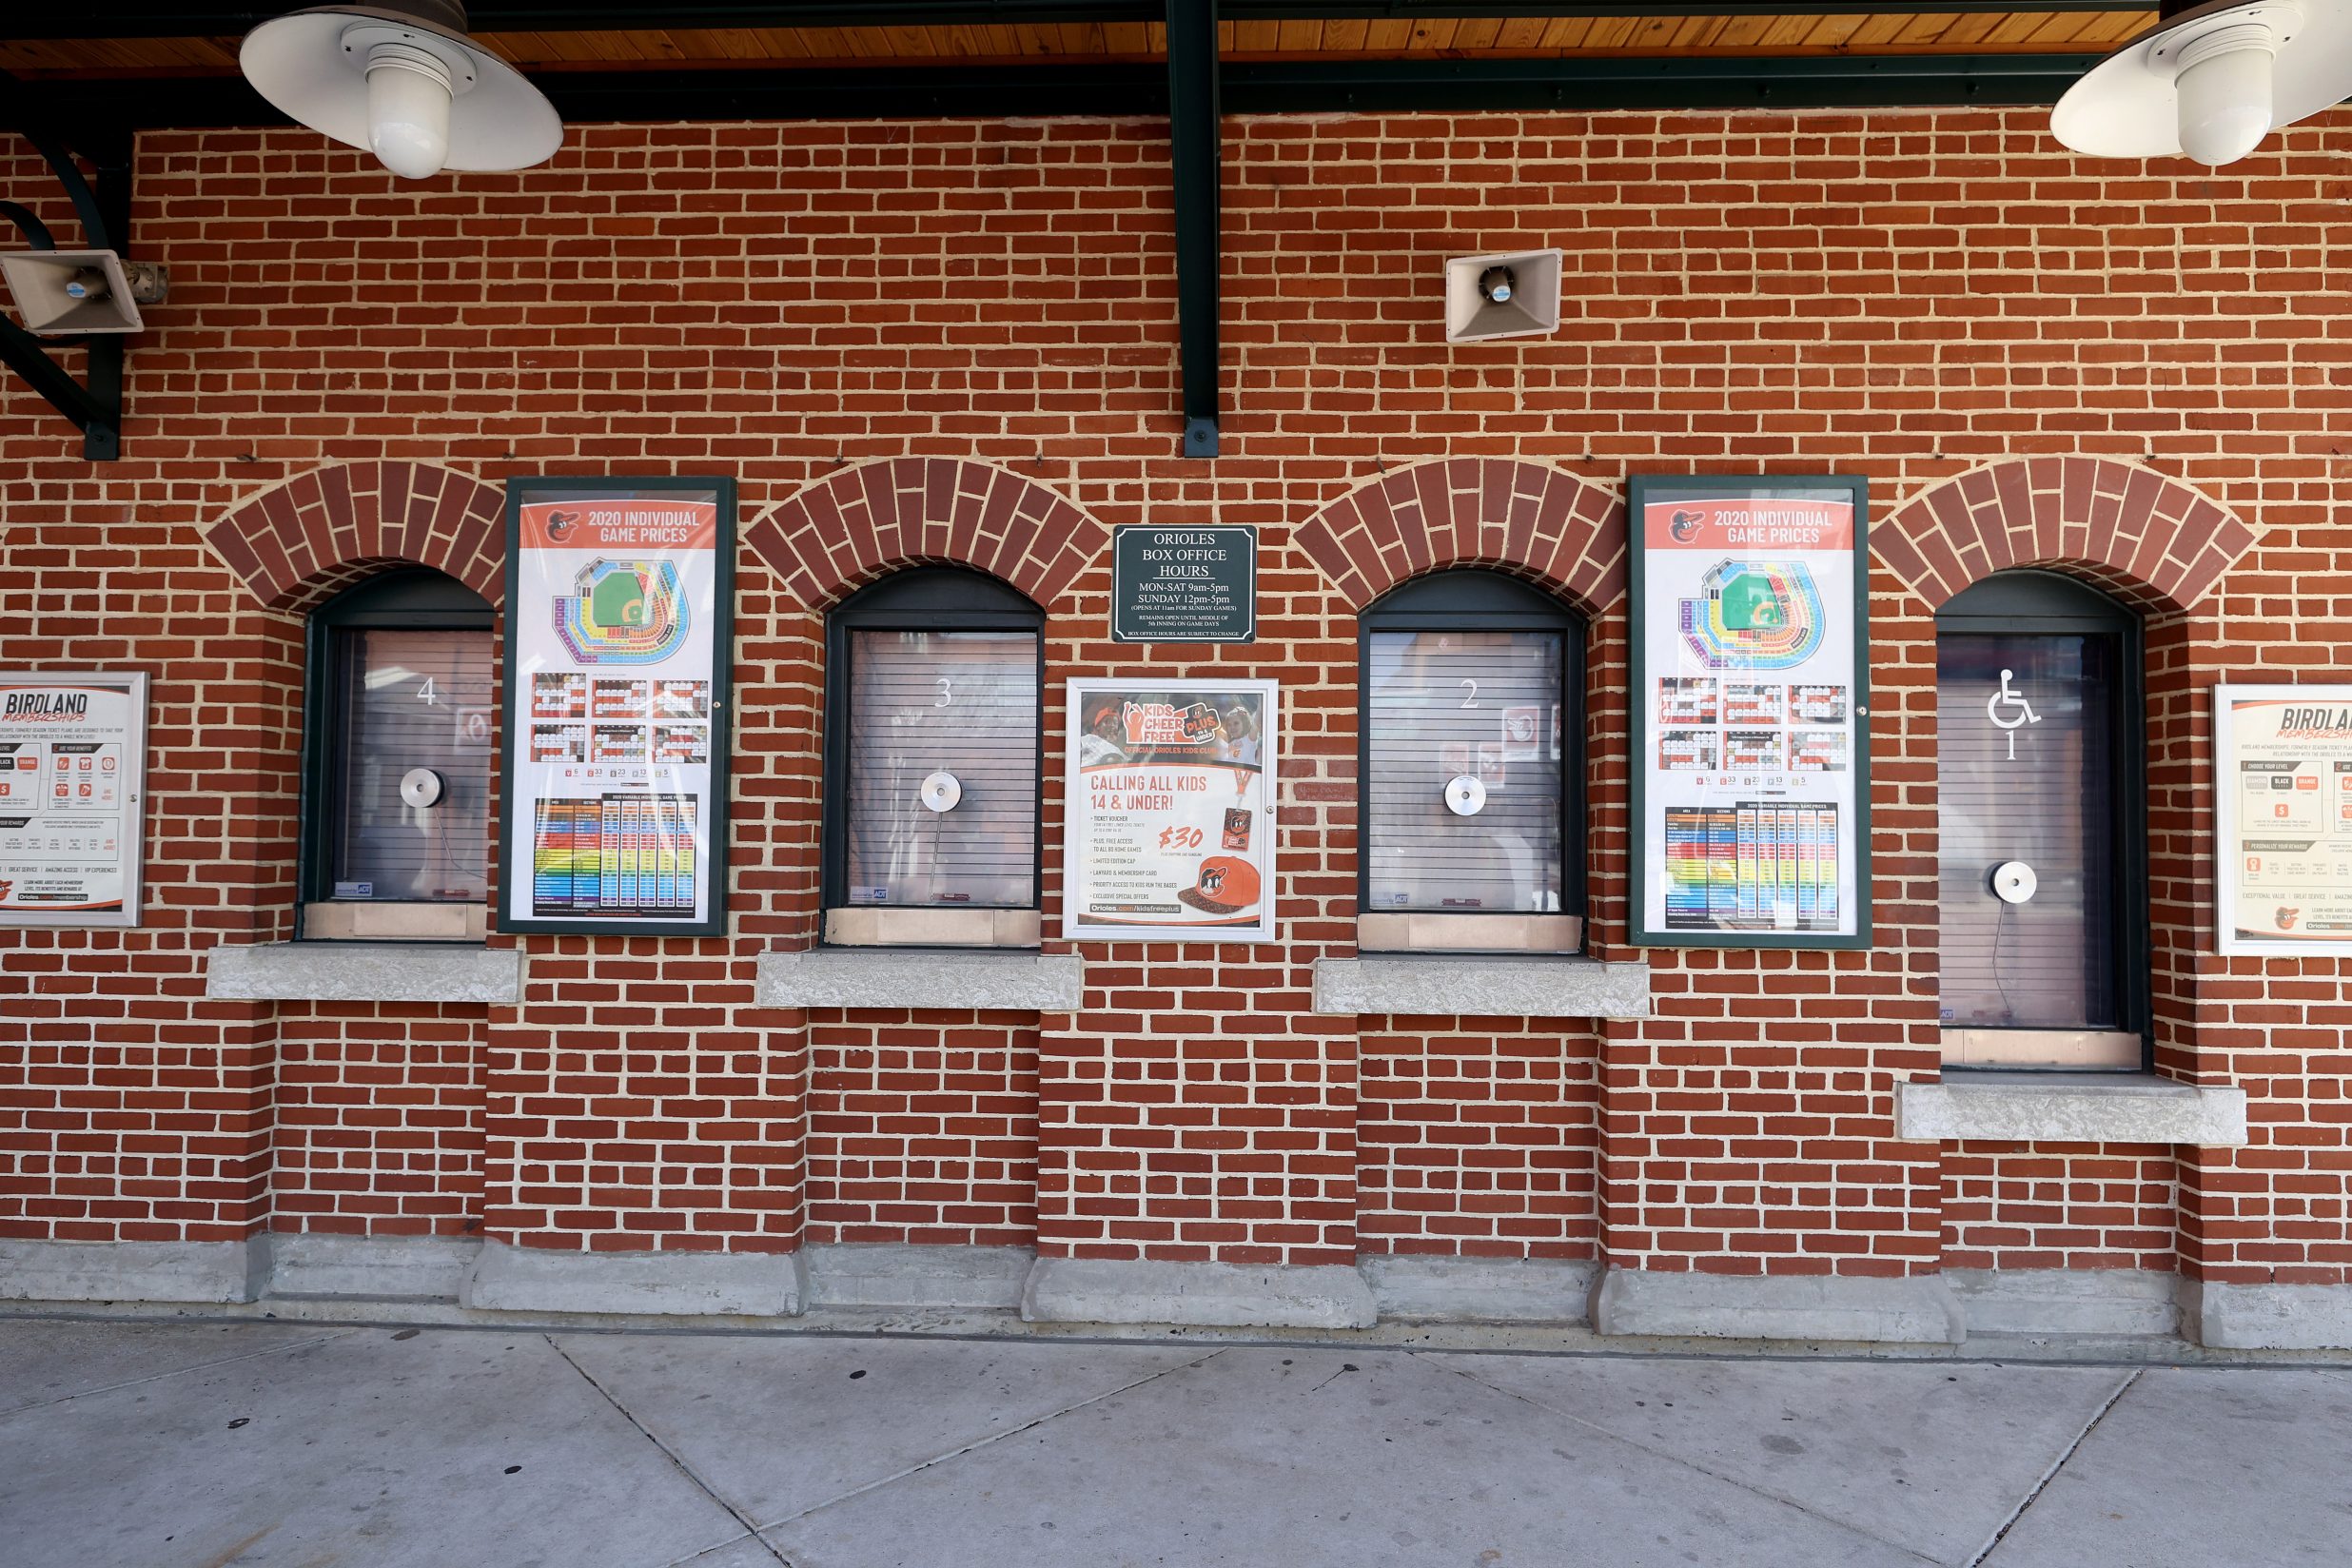 BALTIMORE, MARYLAND - MARCH 26: The closed box office is shown at Oriole Park at Camden Yards on March 26, 2020 in Baltimore, Maryland. The Baltimore Orioles and New York Yankees Opening Day game scheduled for today, along with the entire MLB season, has been postponed due to the COVID-19 pandemic.